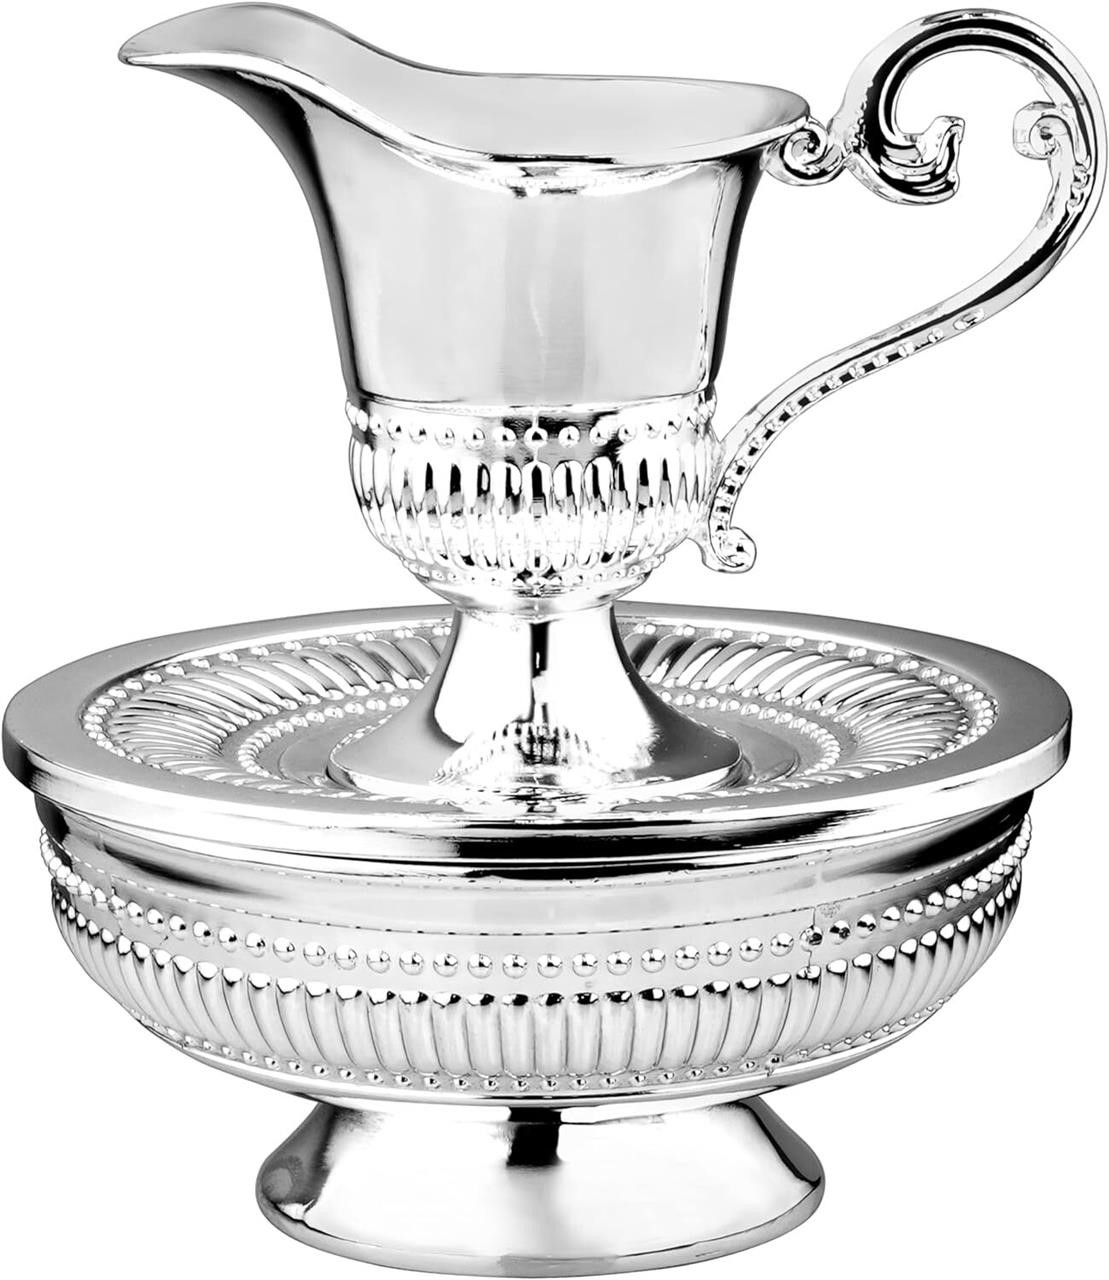 Silver Plated Judaica Washing Cup & Bowl Set